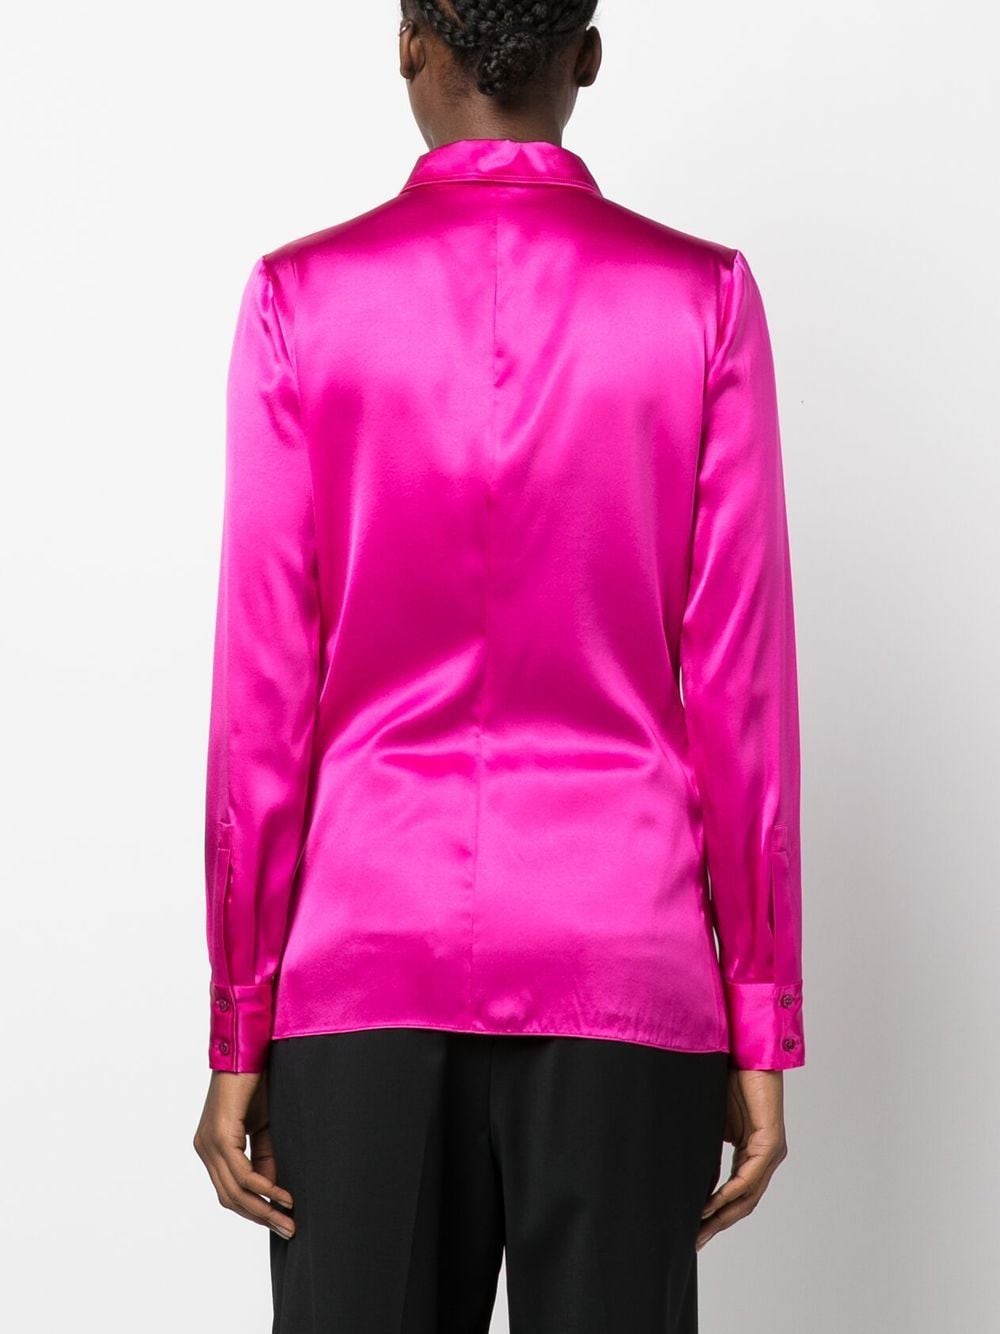 Hot Pink Satin Shirt for Women - Long Sleeve Button-Down Shirt by Tom Ford